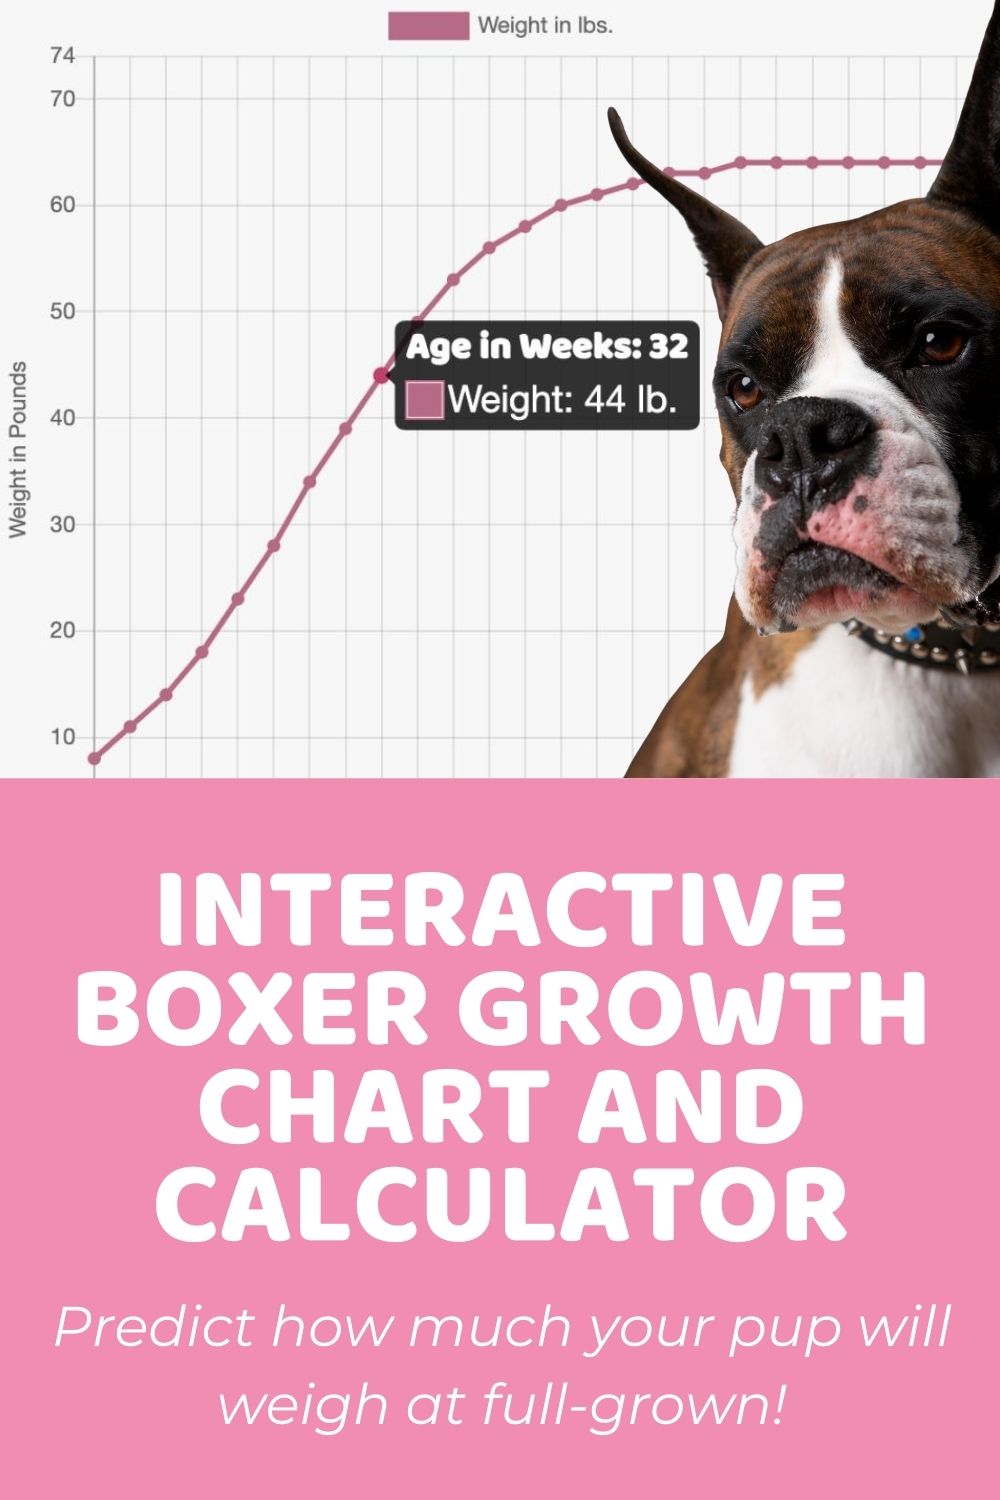 Interactive Boxer Growth Chart and Calculator Puppy Weight Calculator